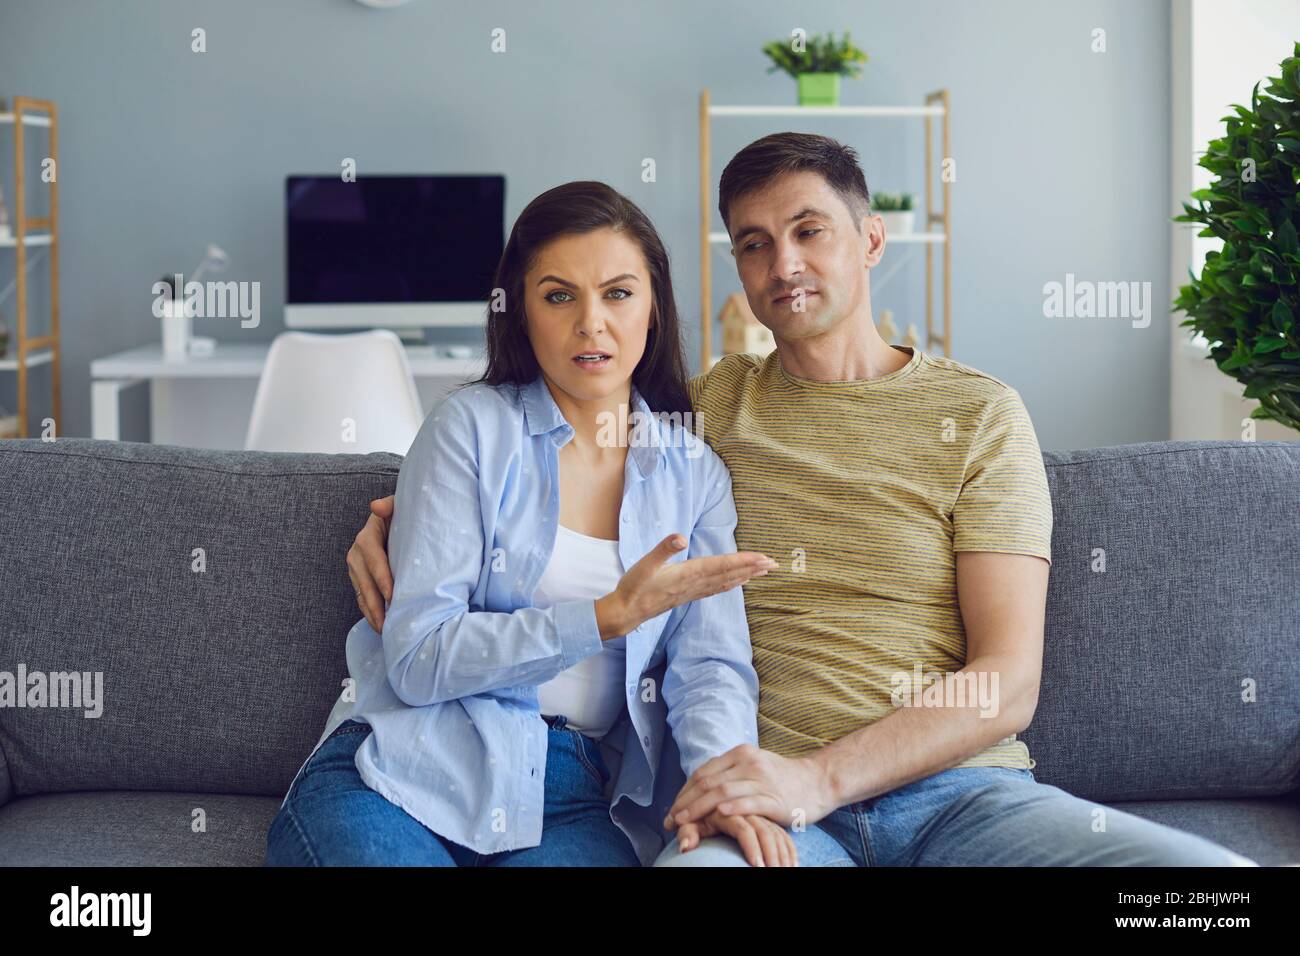 A couple in a serious emotional mood with problems looks at the camera while sitting on the couch. Stock Photo